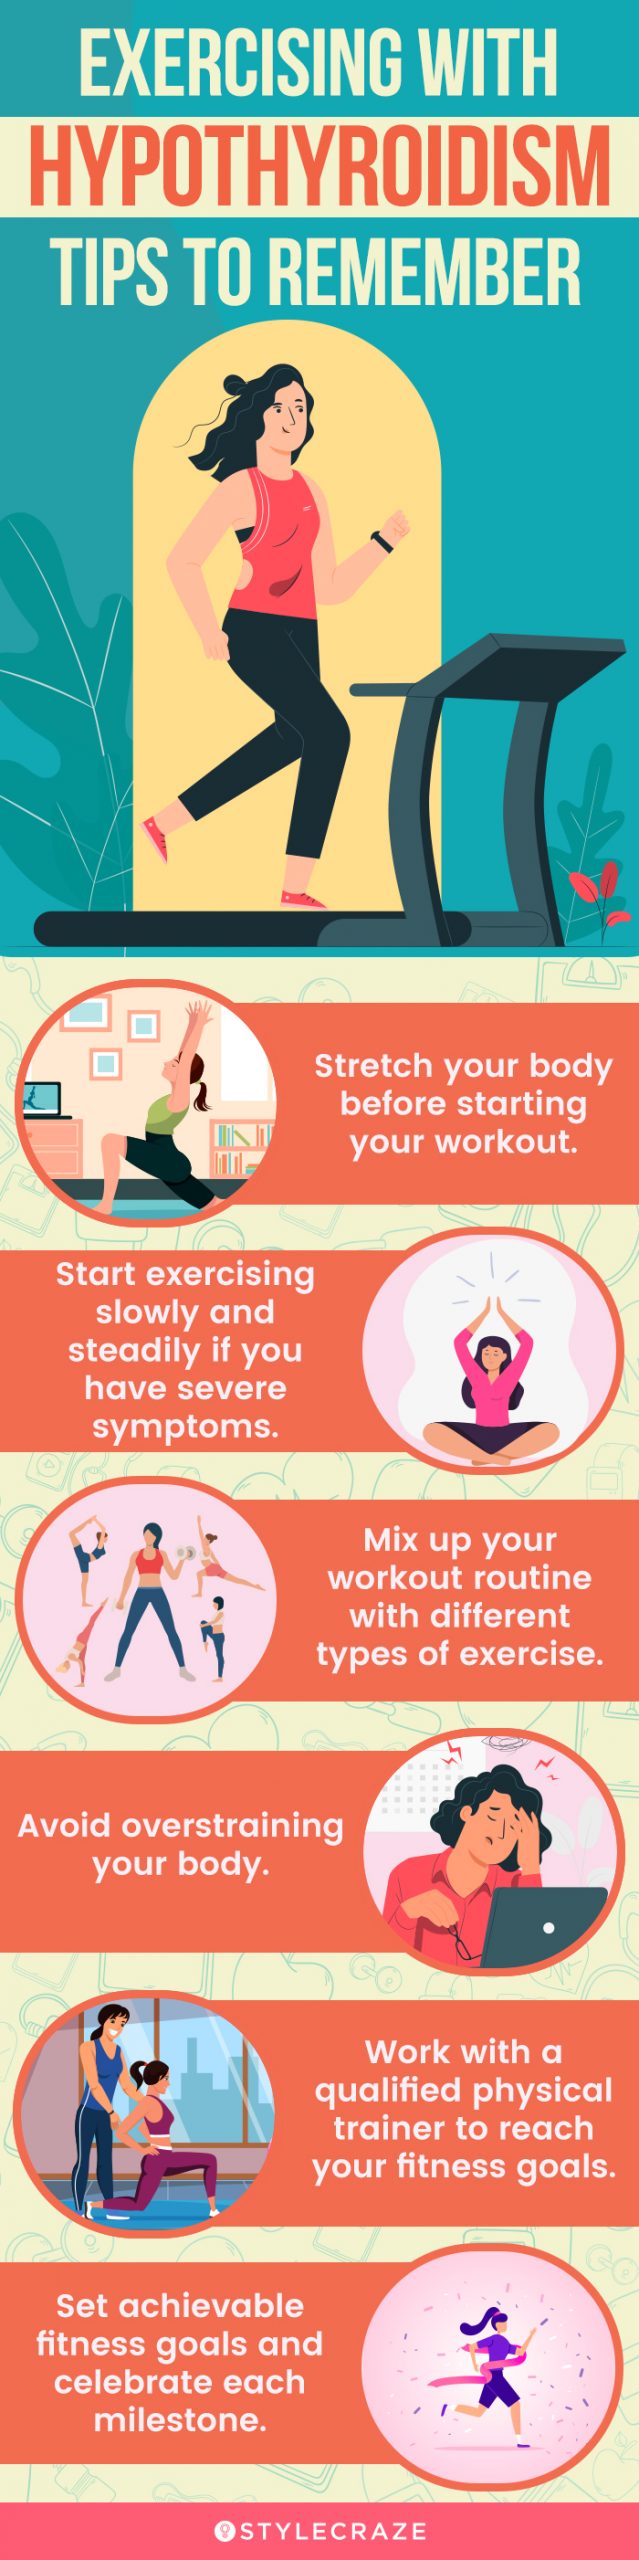 exercising with hypothyroidism tips to remember [infographic]